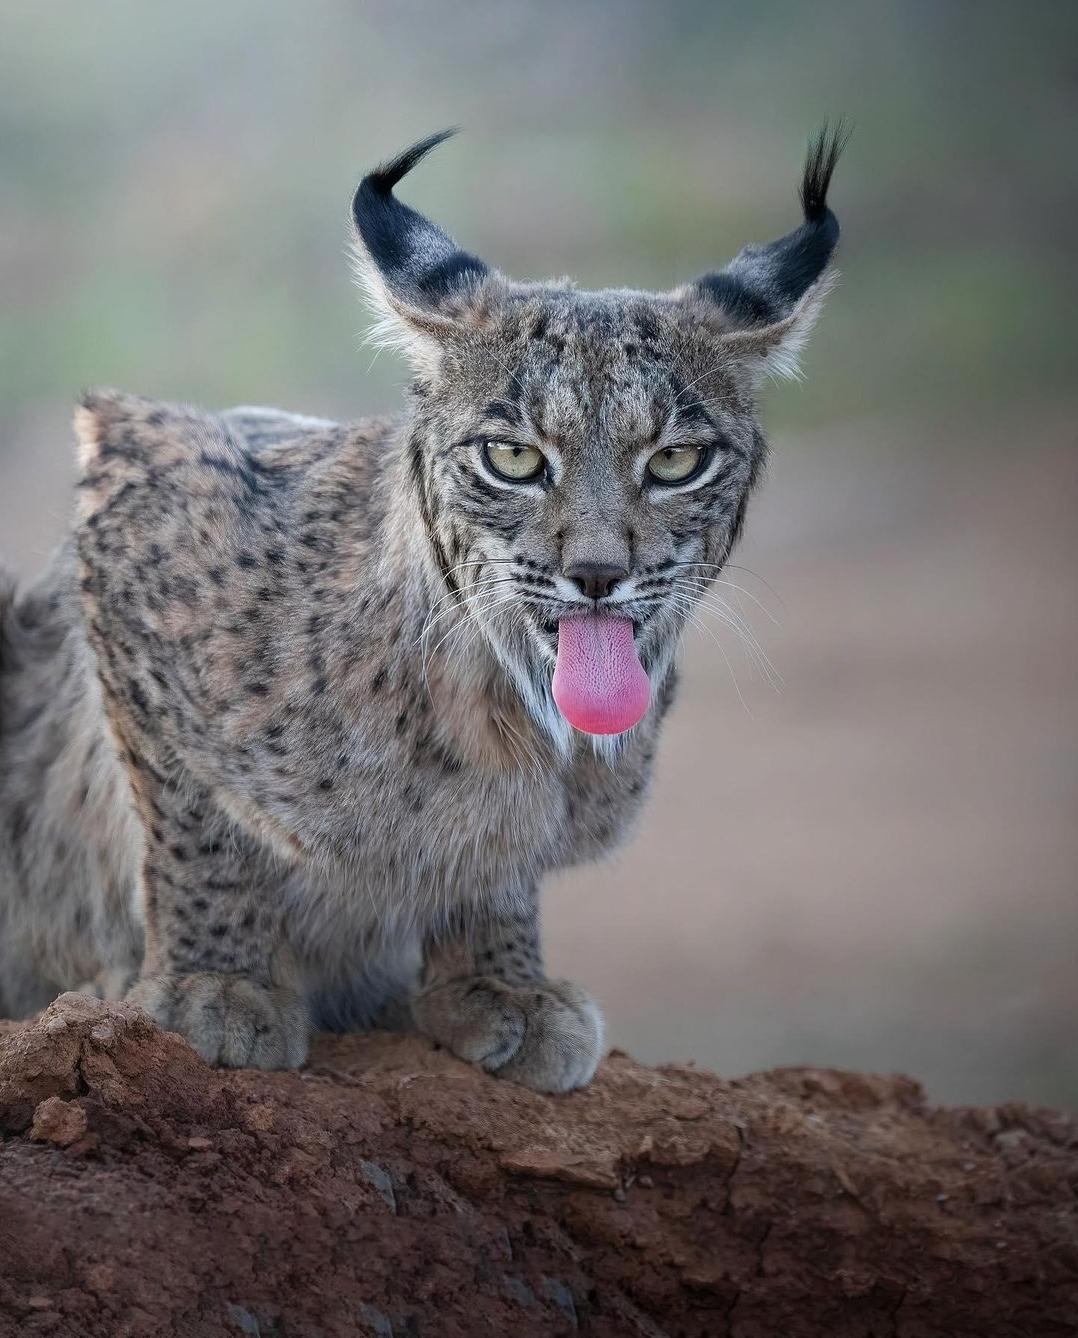 The Iberian Lynx (Lynx pardinus) is one of the four species of lynx and is one of the world's most endangered feline species. Conservation efforts have increased their numbers from 100 in the early 2000s and brought them back from near extinction. (More in comments)